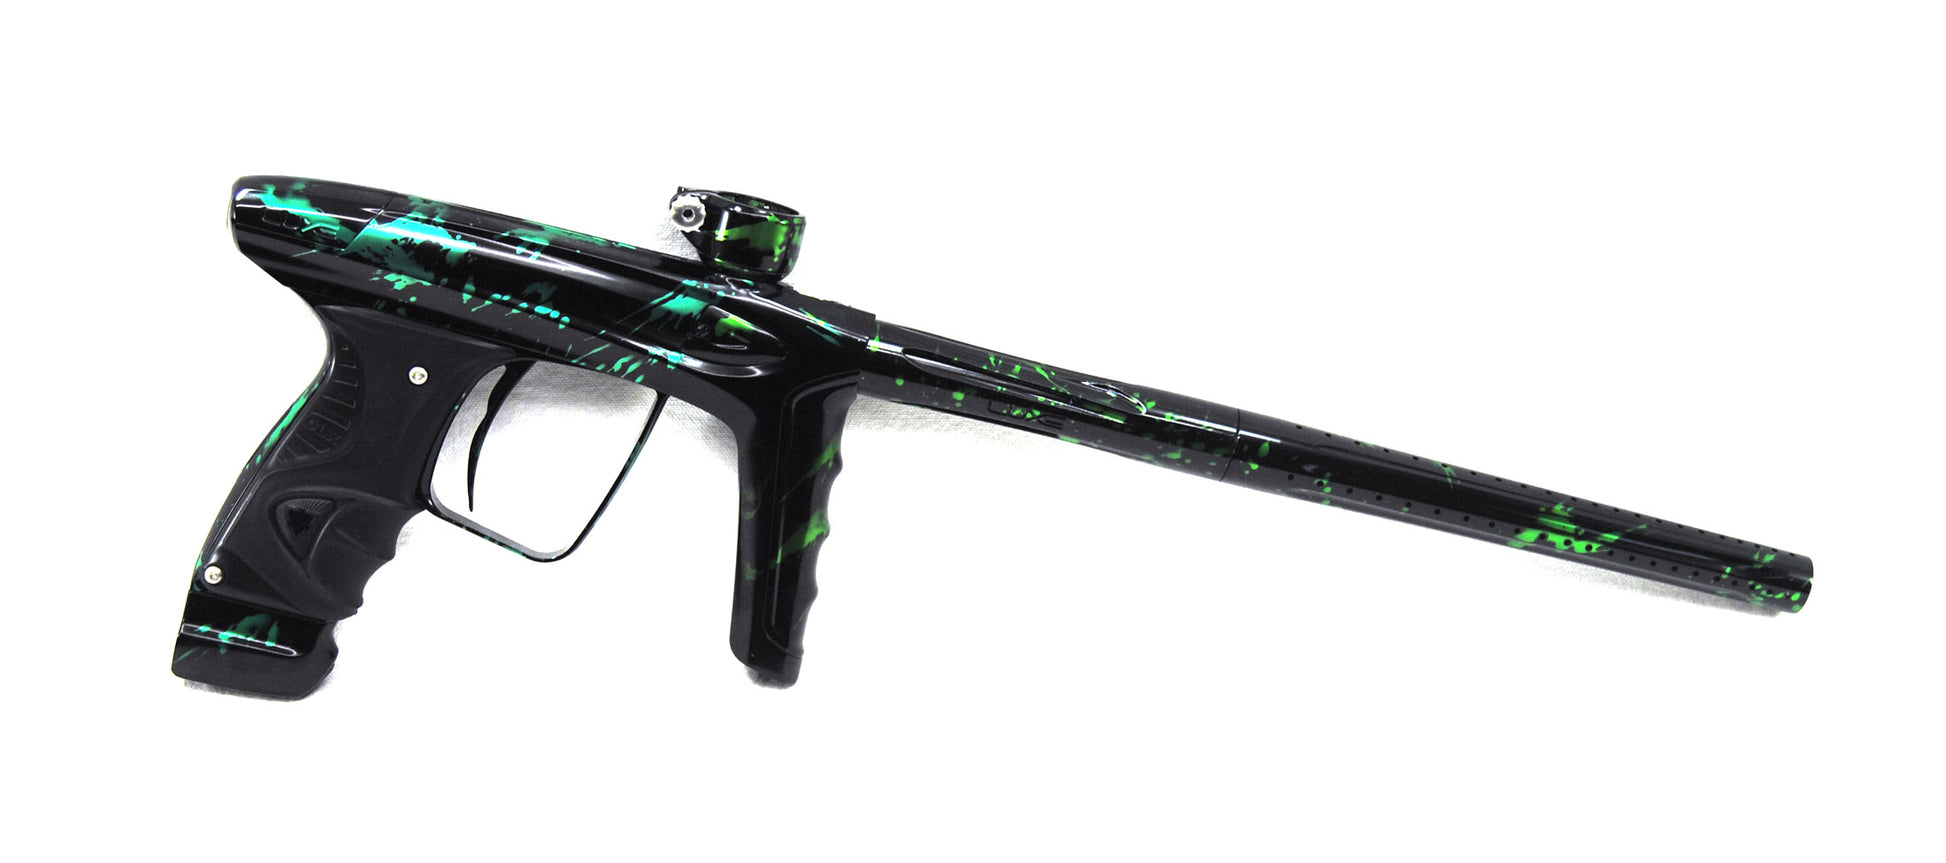 DLX LUXE ICE Limited Edition Splash - Gloss Black/Lime/Mint - #7 of 10 - Planet Eclipse